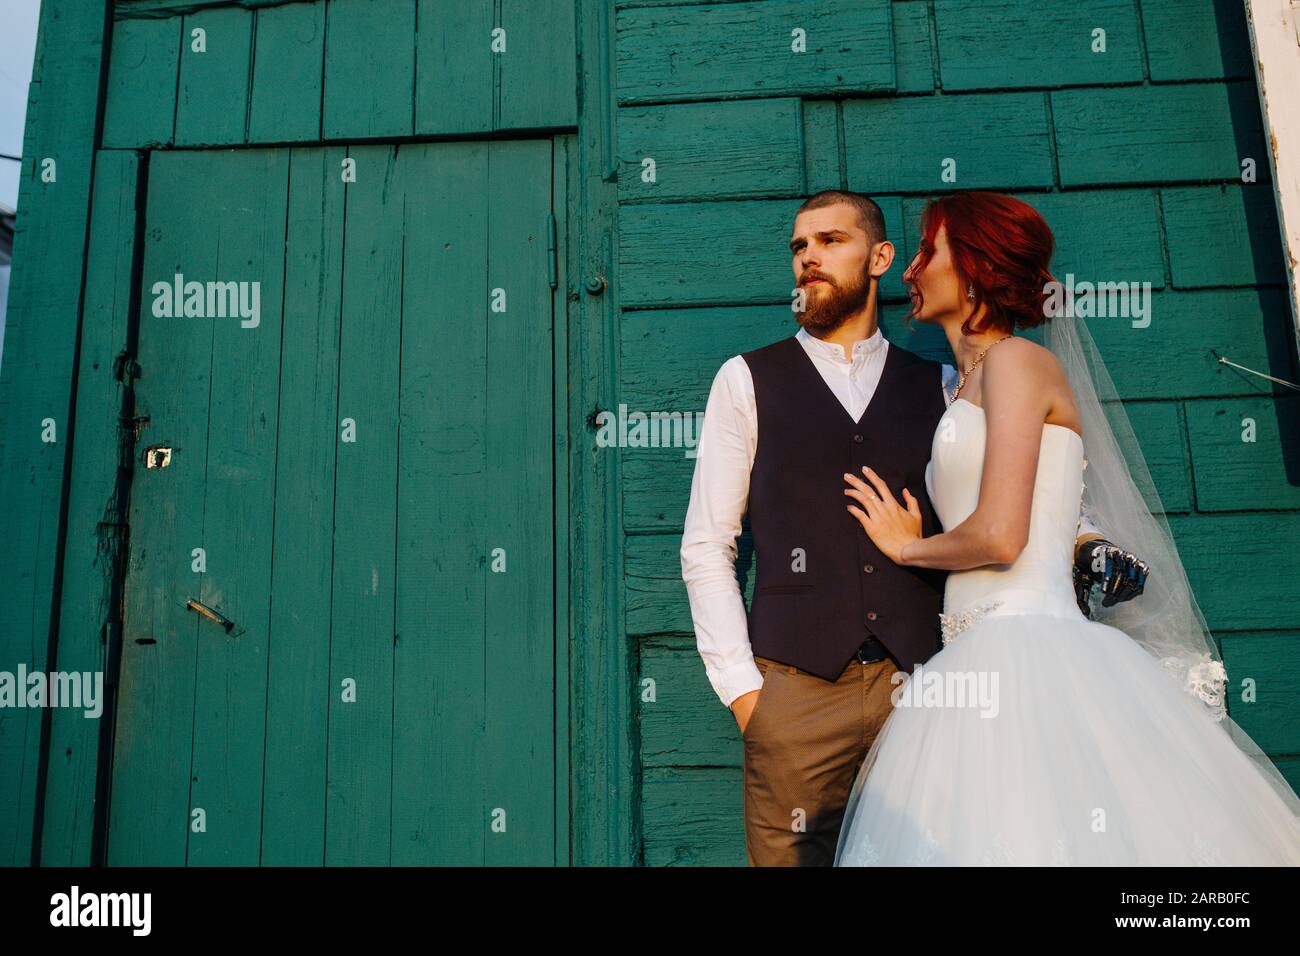 Handsome newly wed man and wife standind in front of painted wall with a door Stock Photo